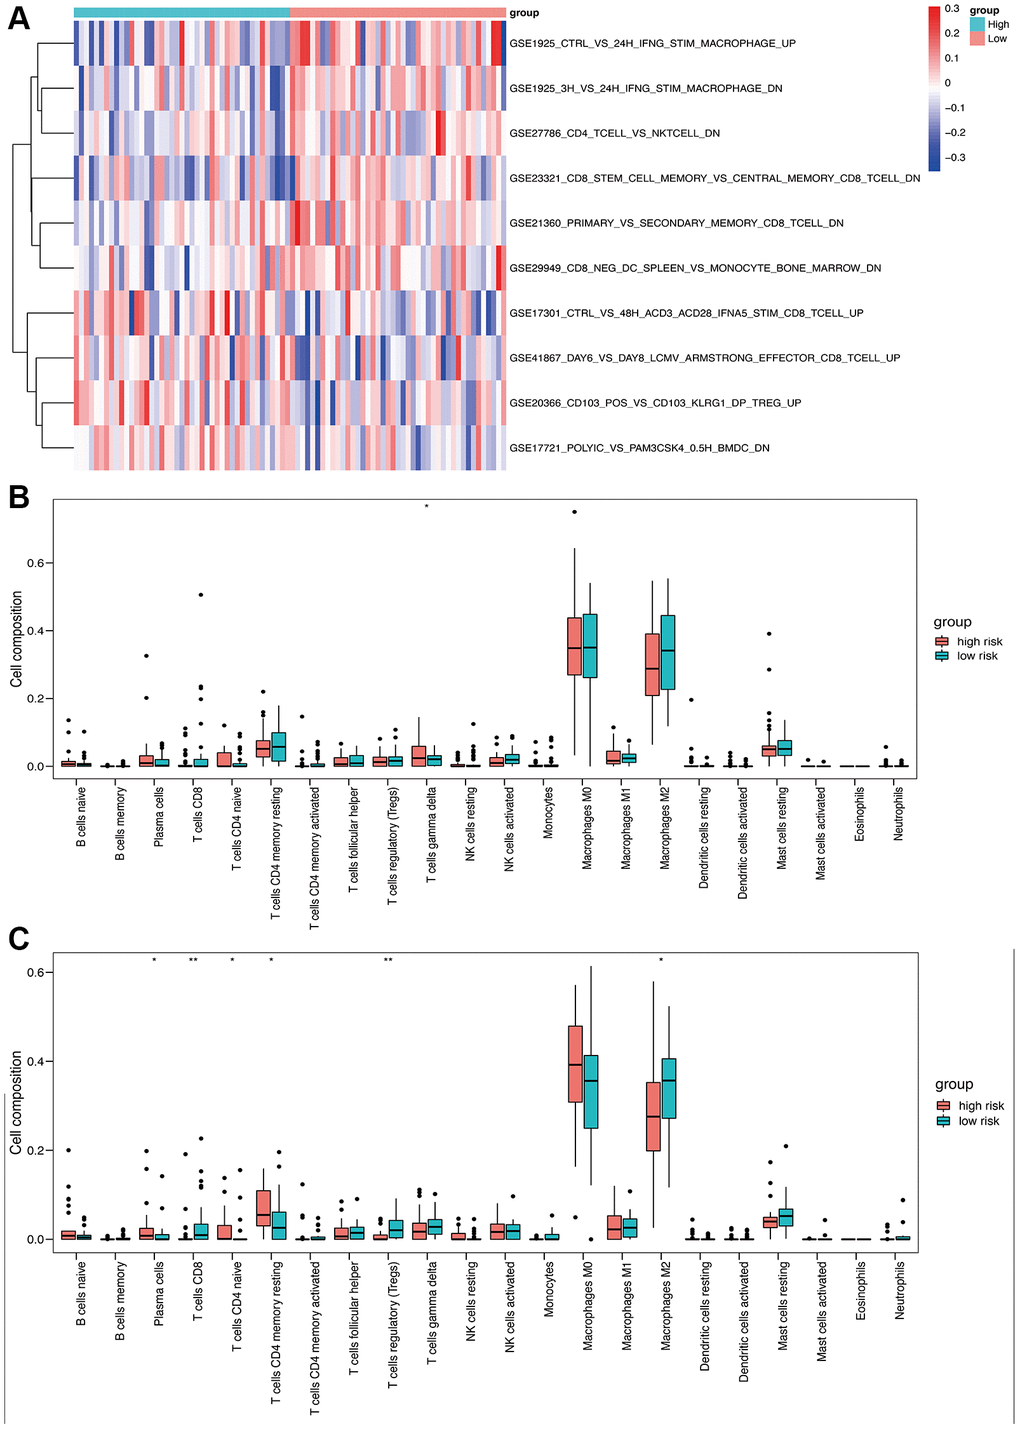 Immune analysis based on high- and low-risk groups. (A) Immune-related pathway GSVA between high- and low-risk groups. (B) Box plot of 22 immune cells in the high- and low-risk groups of the training cohort. (C) Box plot of 22 immune cells in the high- and low-risk groups of the validation cohort.